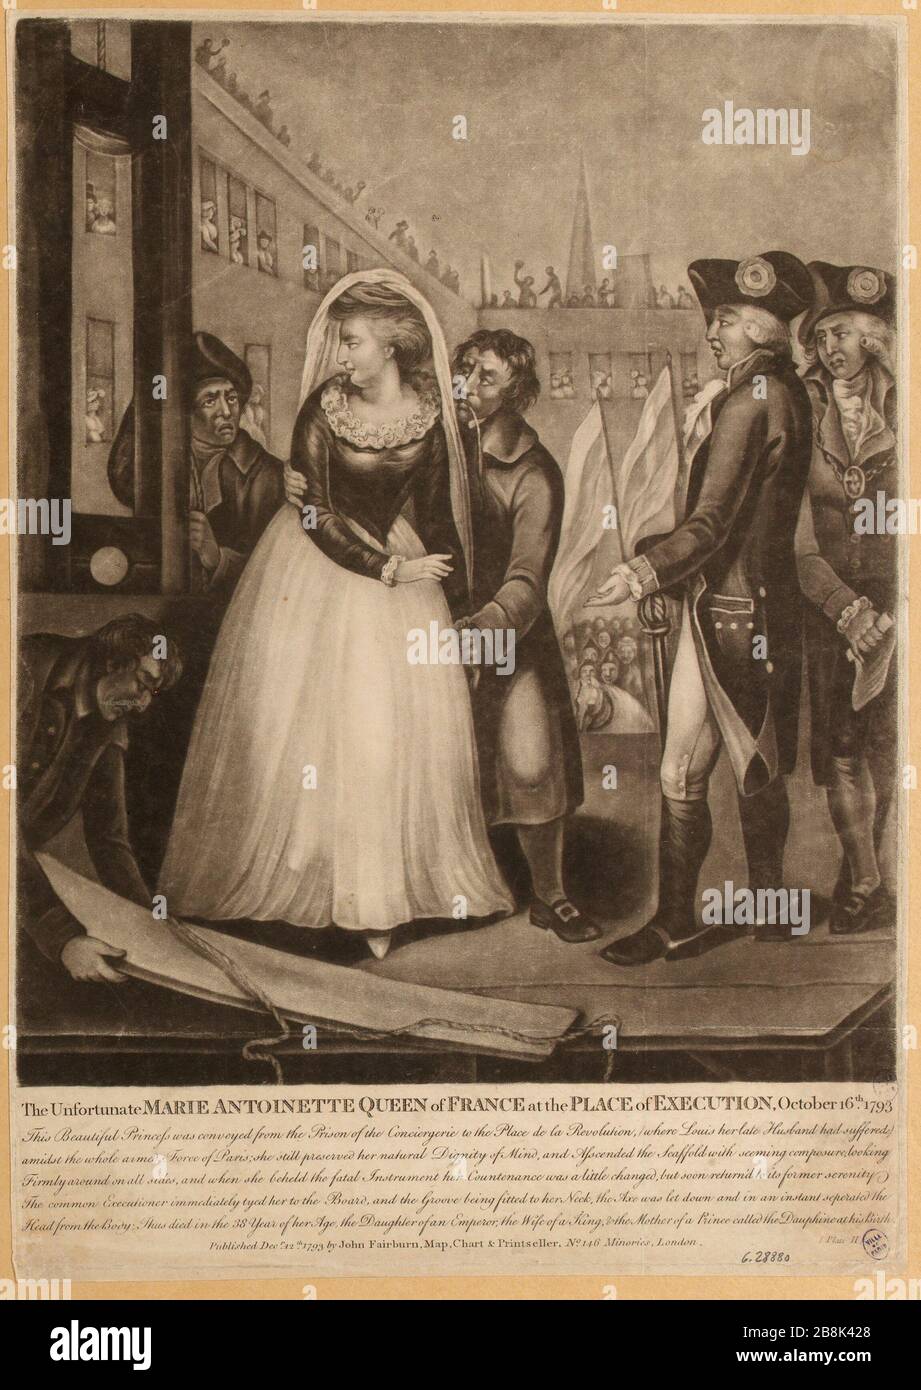 The Unfortunate Marie Antoinette Queen of France at the Place of Execution, October 16th 1793.(TI) Stock Photo